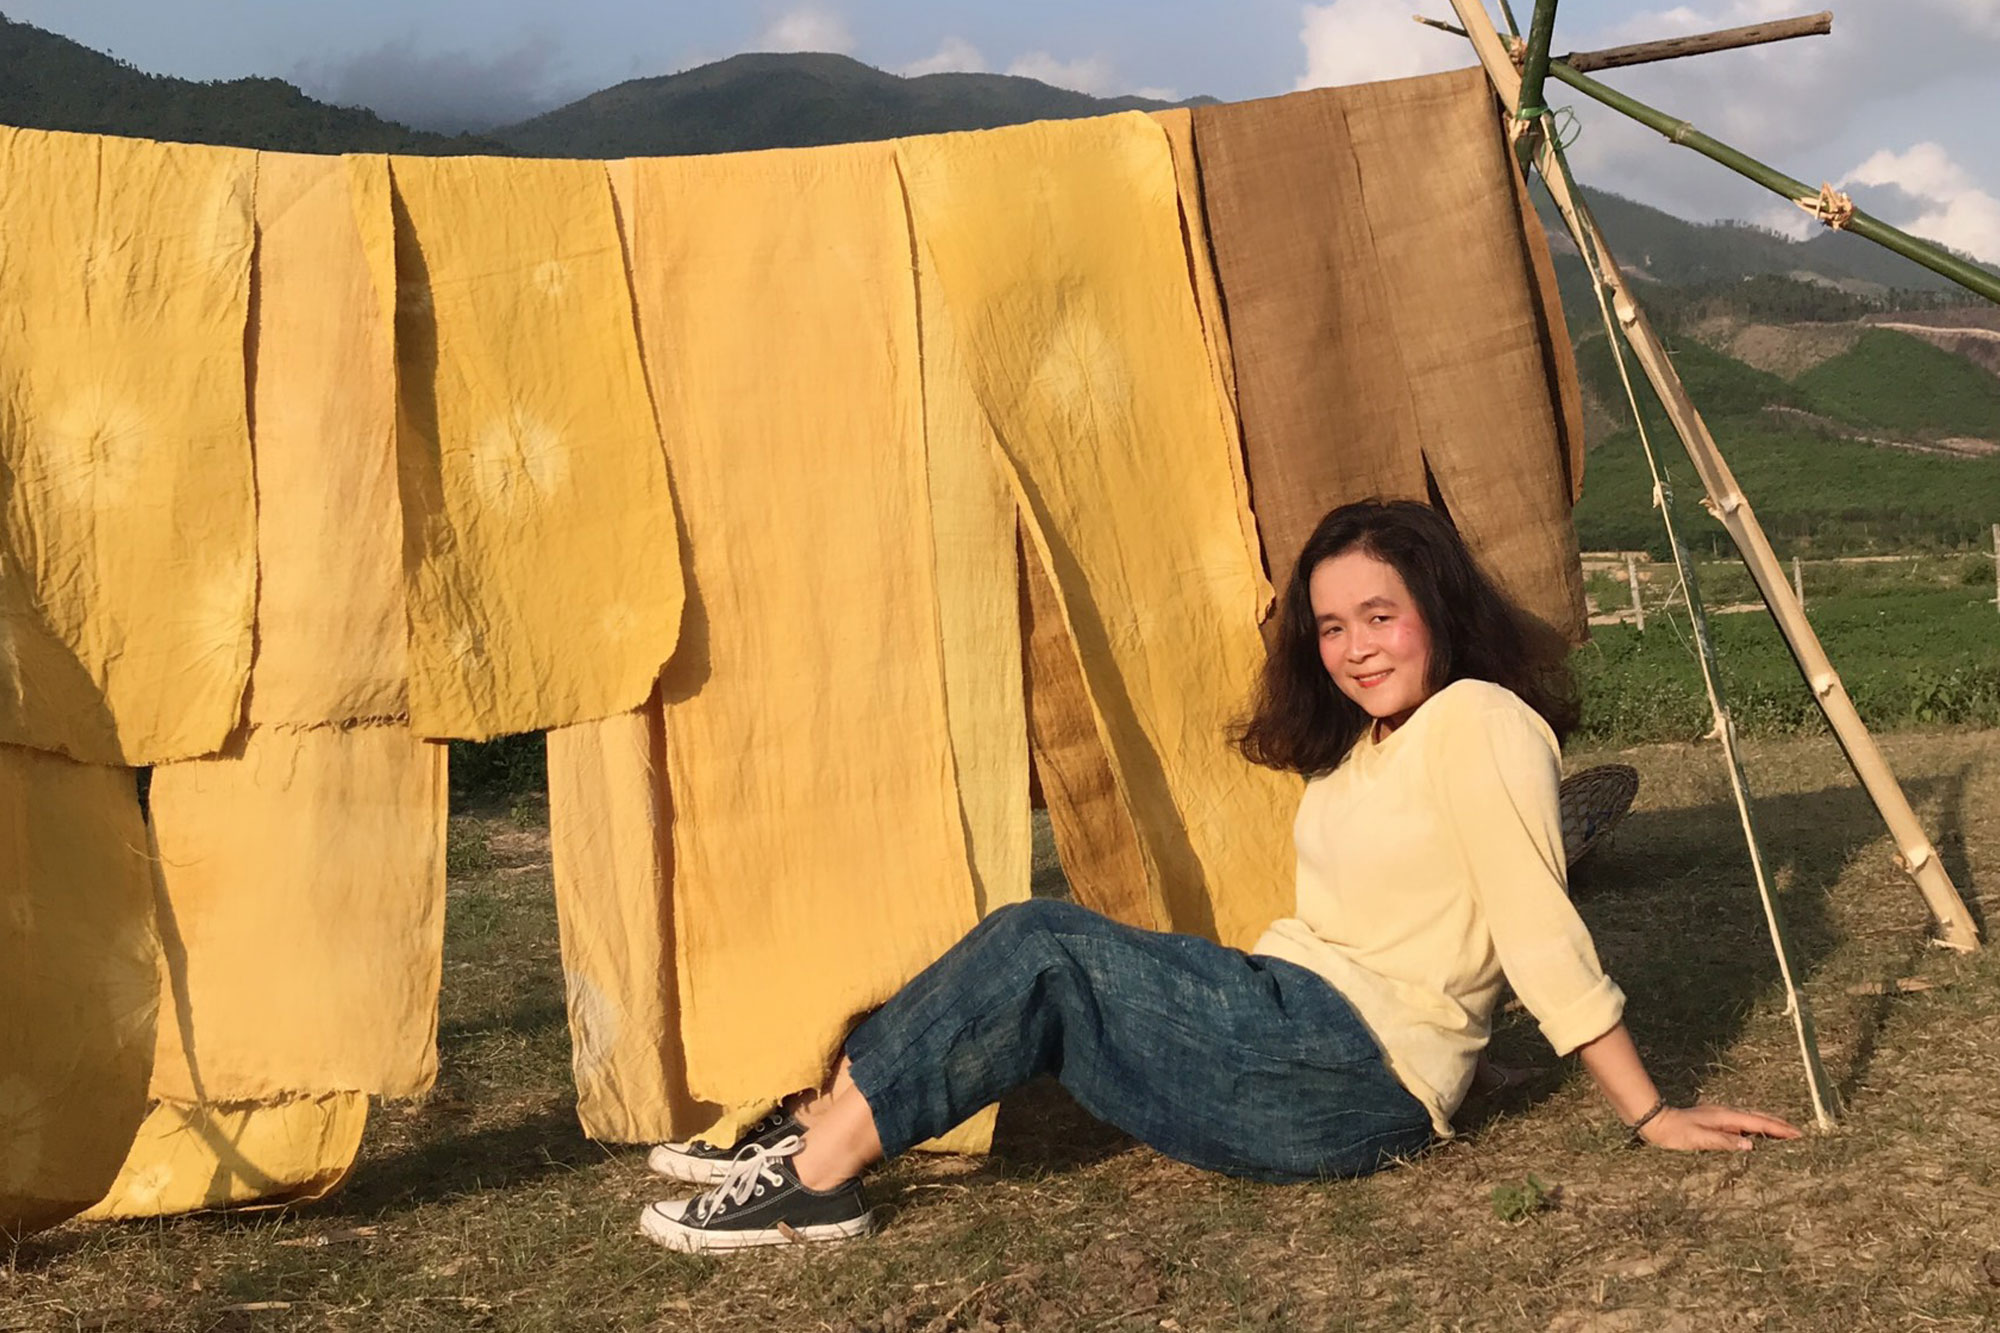 A person sitting on grass with mountains and blue sky in the background. The're sitting in front of some yellow dyed fabric that is hanging to dry. The person is smiling, has long, dark, currly hair and is wearing a long sleeved light yellow top, jeans and some black and white sneakers.